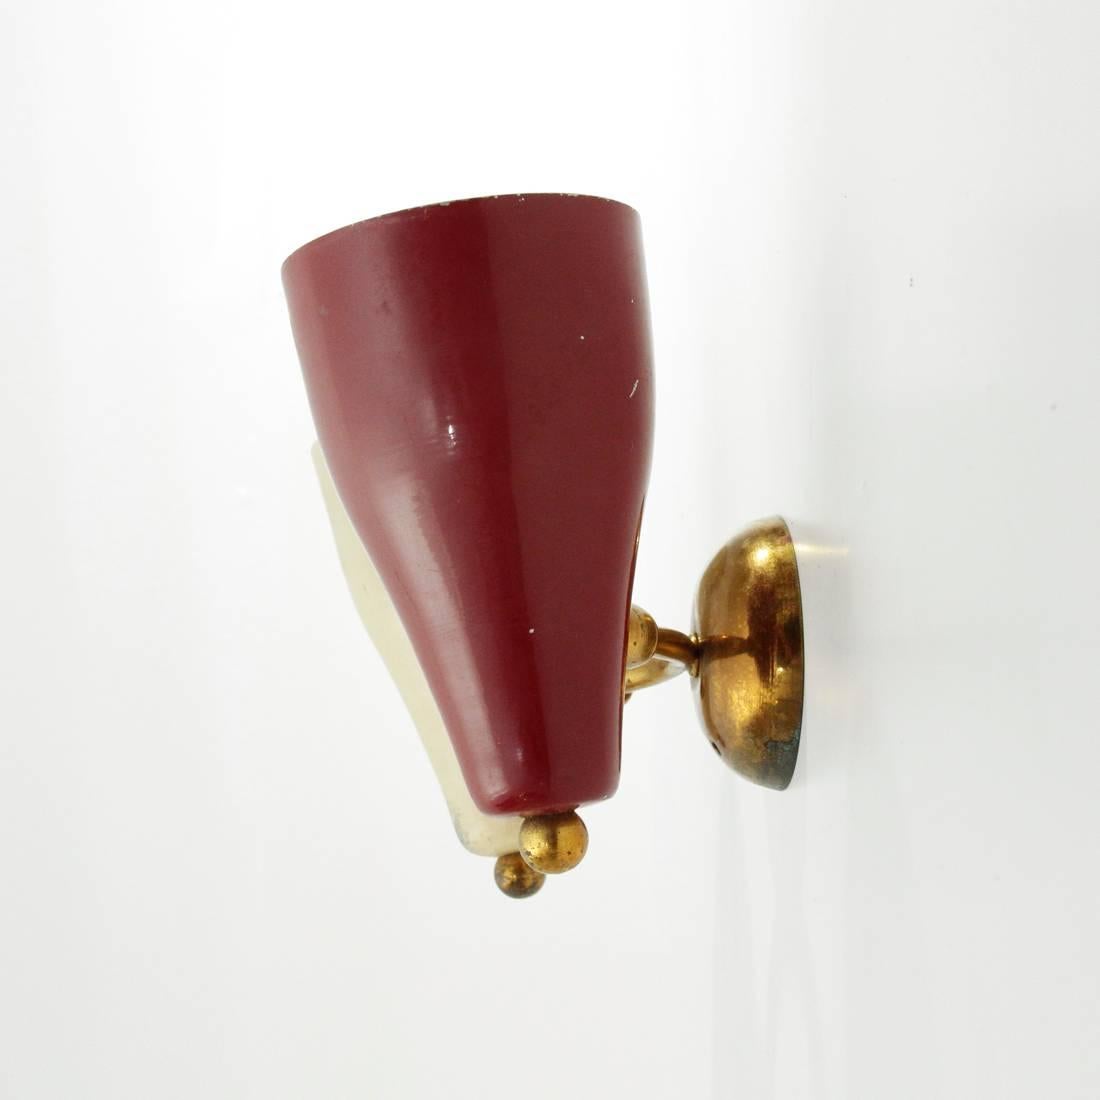 Wall lamp of Italian manufacture produced in the 1950s.
Wall plate in brass.
Brass stem with joint.
Two red and white painted aluminum diffusers with brass details.
Structure in good general condition, paint damaged in some parts.

Dimensions: